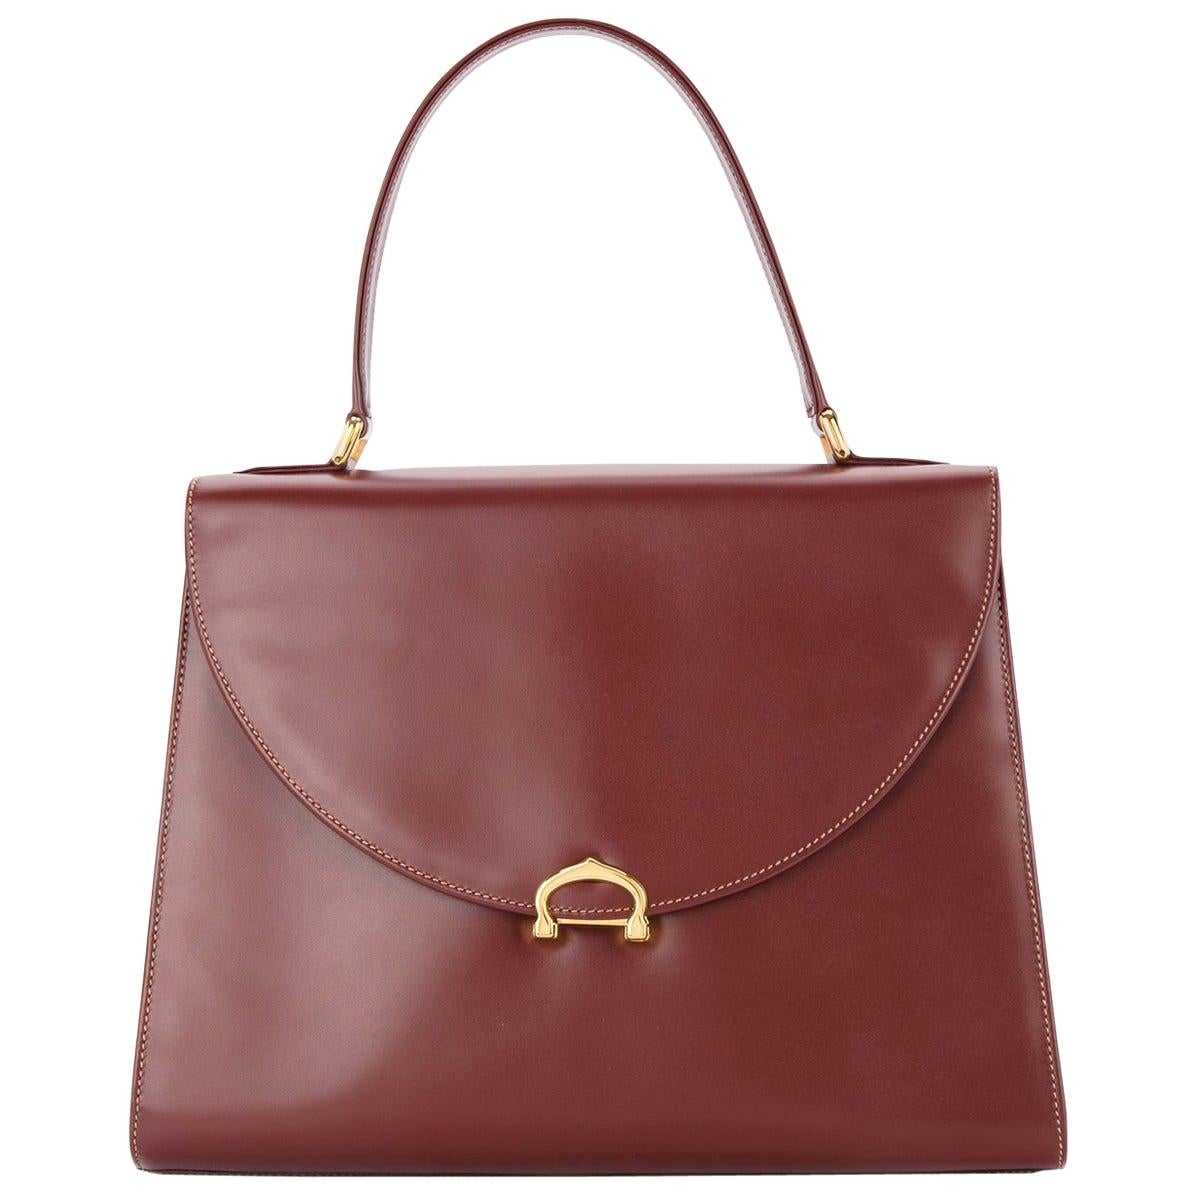 Cartier Wine Burgundy Leather Gold Charm Logo Kelly Style Top Handle Satchel Bag